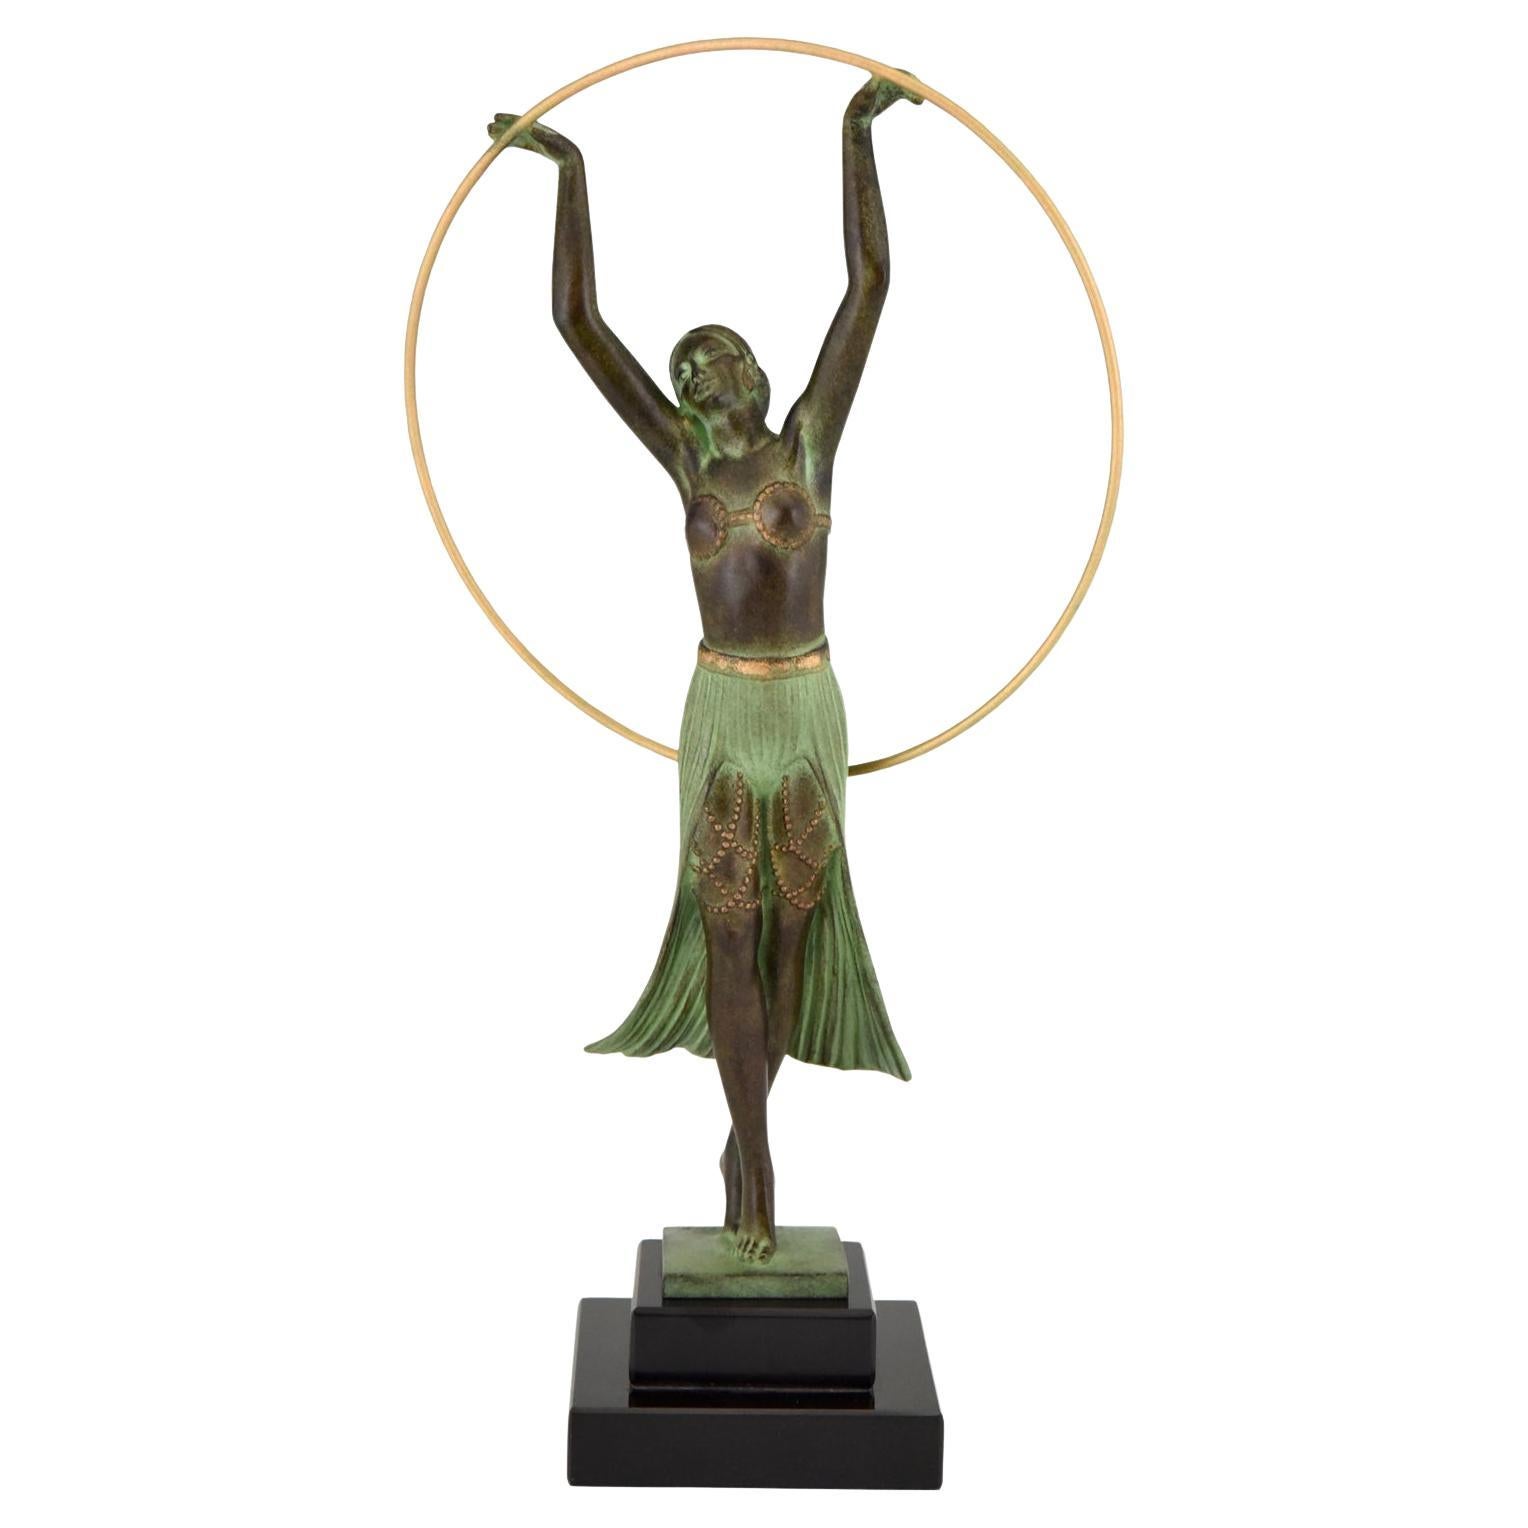 Art Deco style Sculpture BAYADERE Hoop Dancer by Charles for Max Le Verrier For Sale